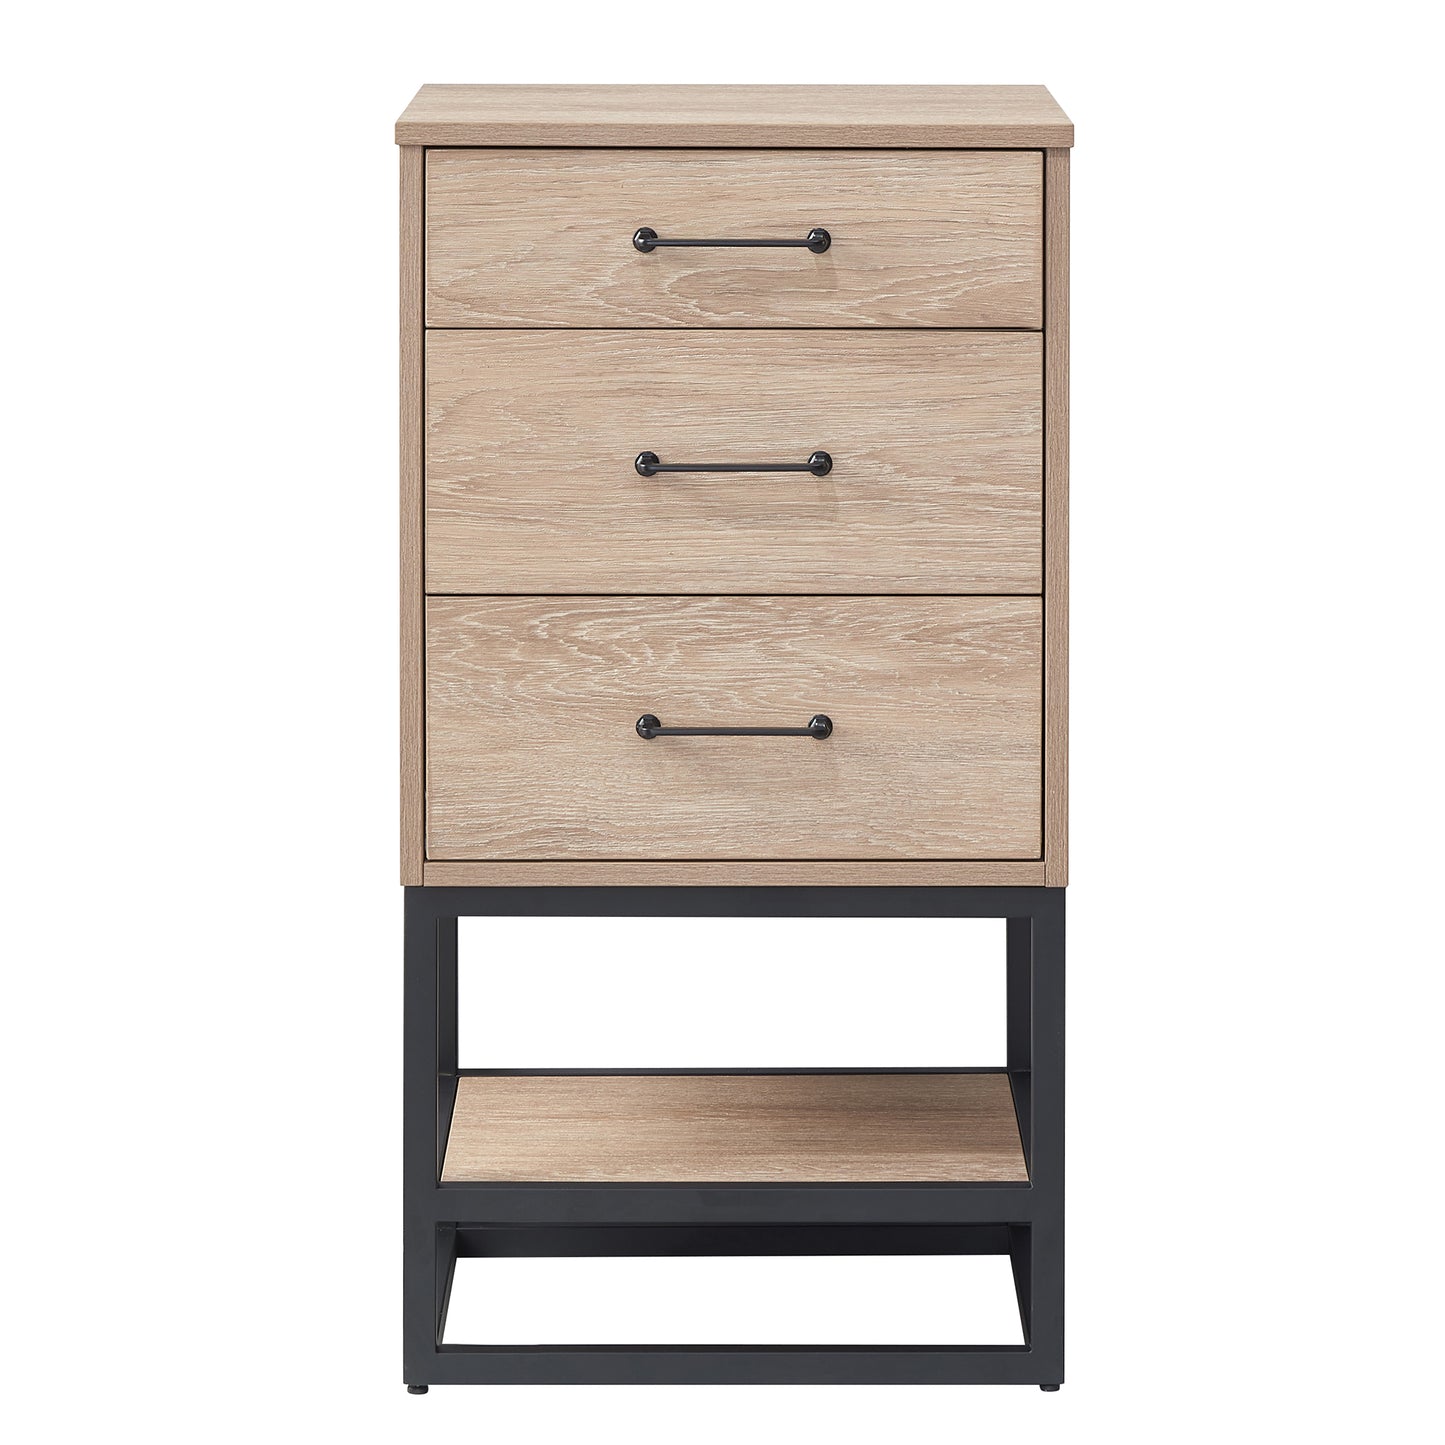 Alistair 19.7" Storage Cabinet in North American Oak Finish with 3 Drawers 1 Shelf for Bathroom and Living Room